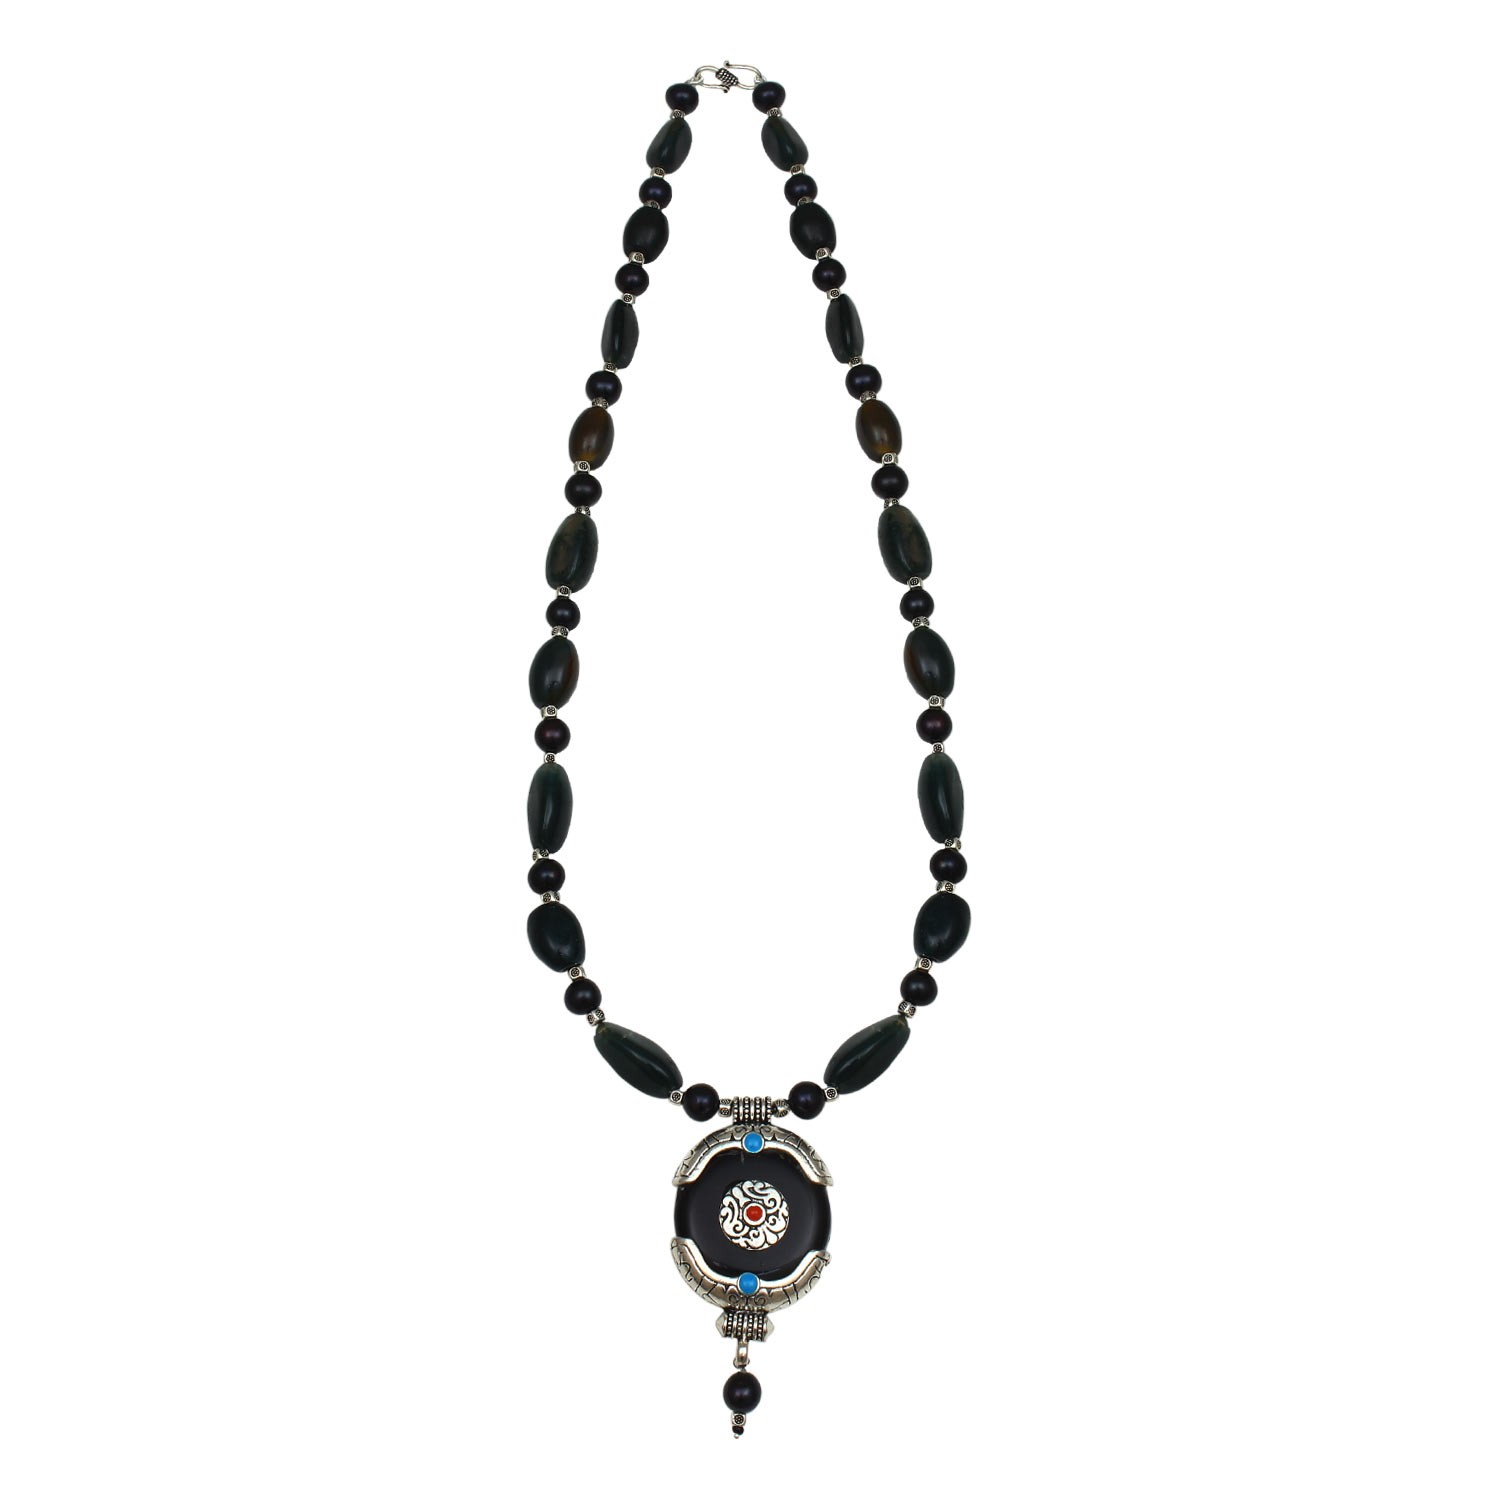 Deep Blue Agate Necklace for Women and Girls